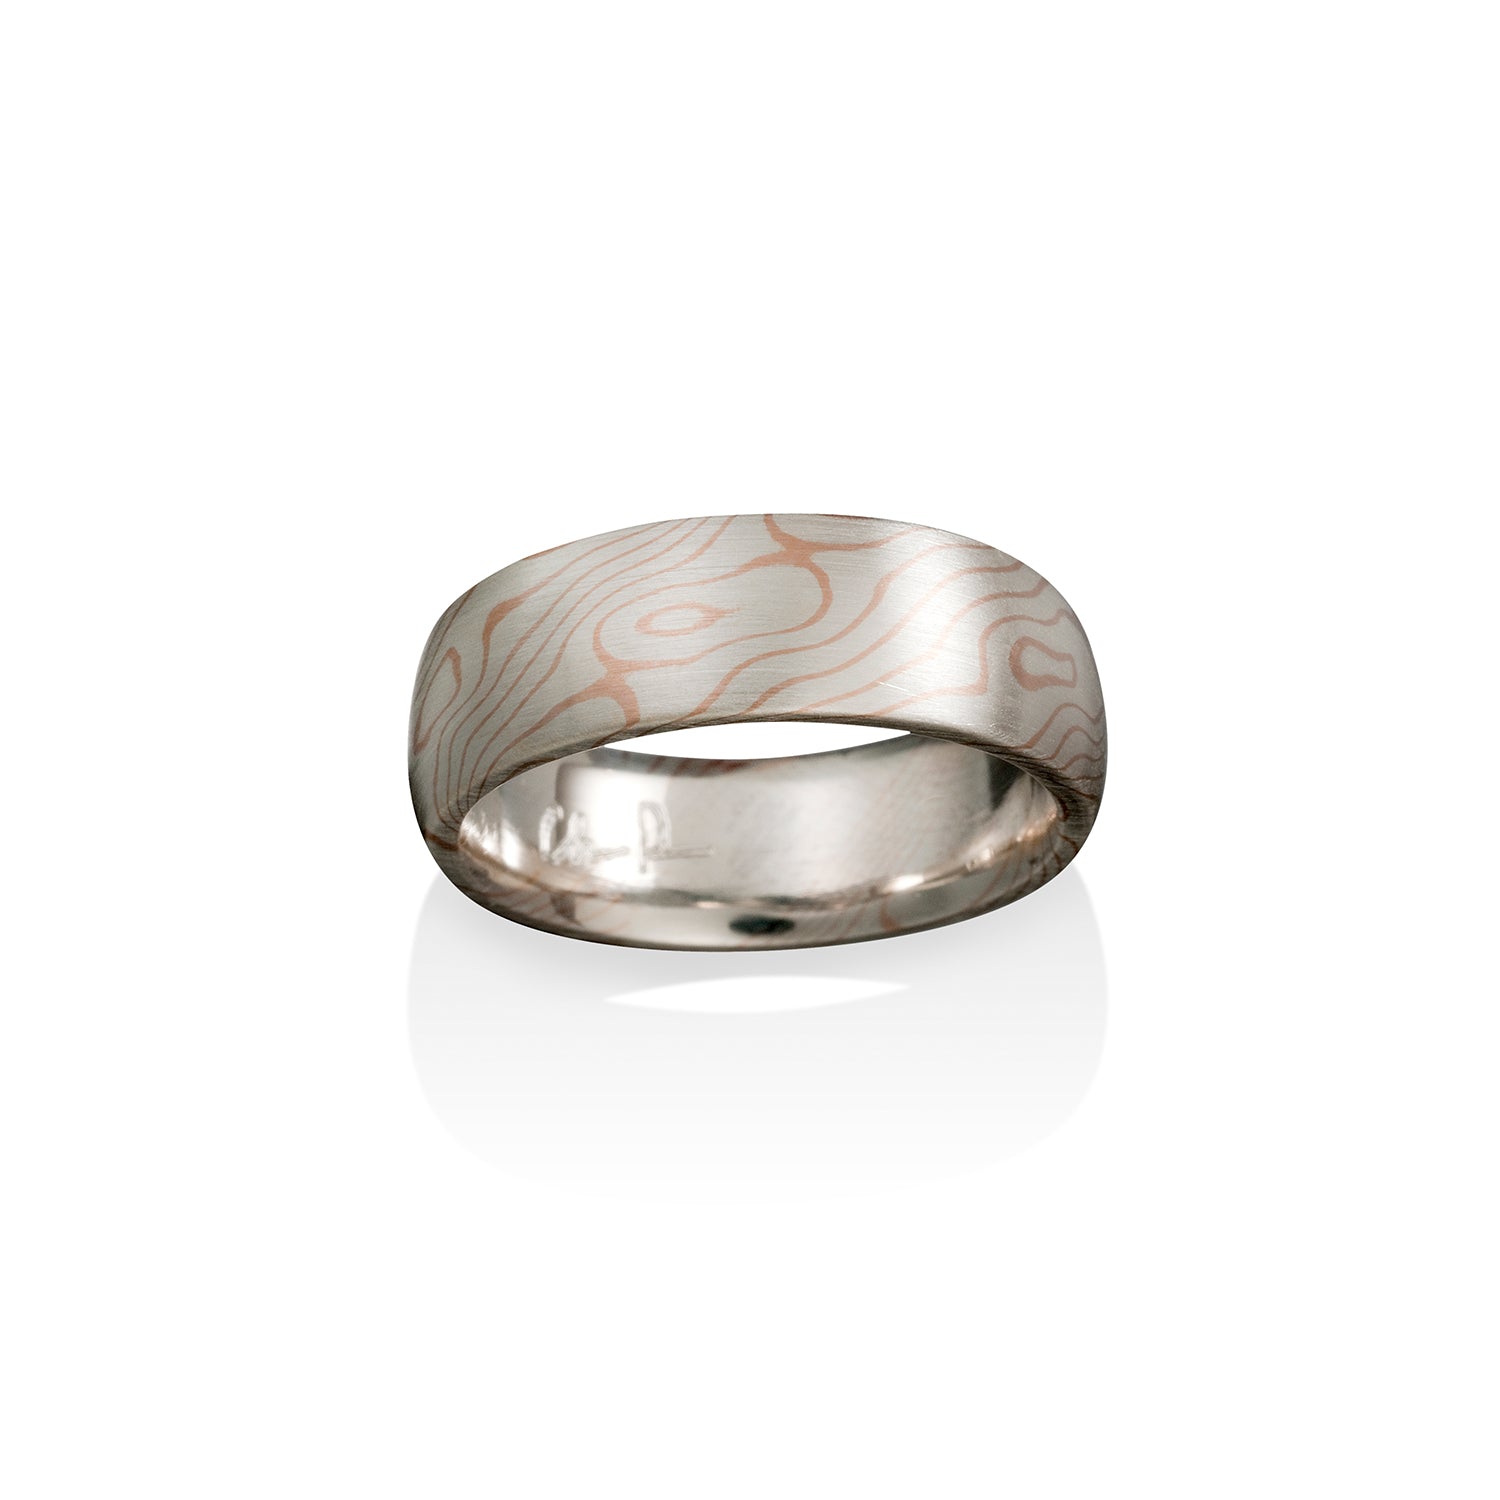 Aspen by Chris Ploof - Talisman Collection Fine Jewelers